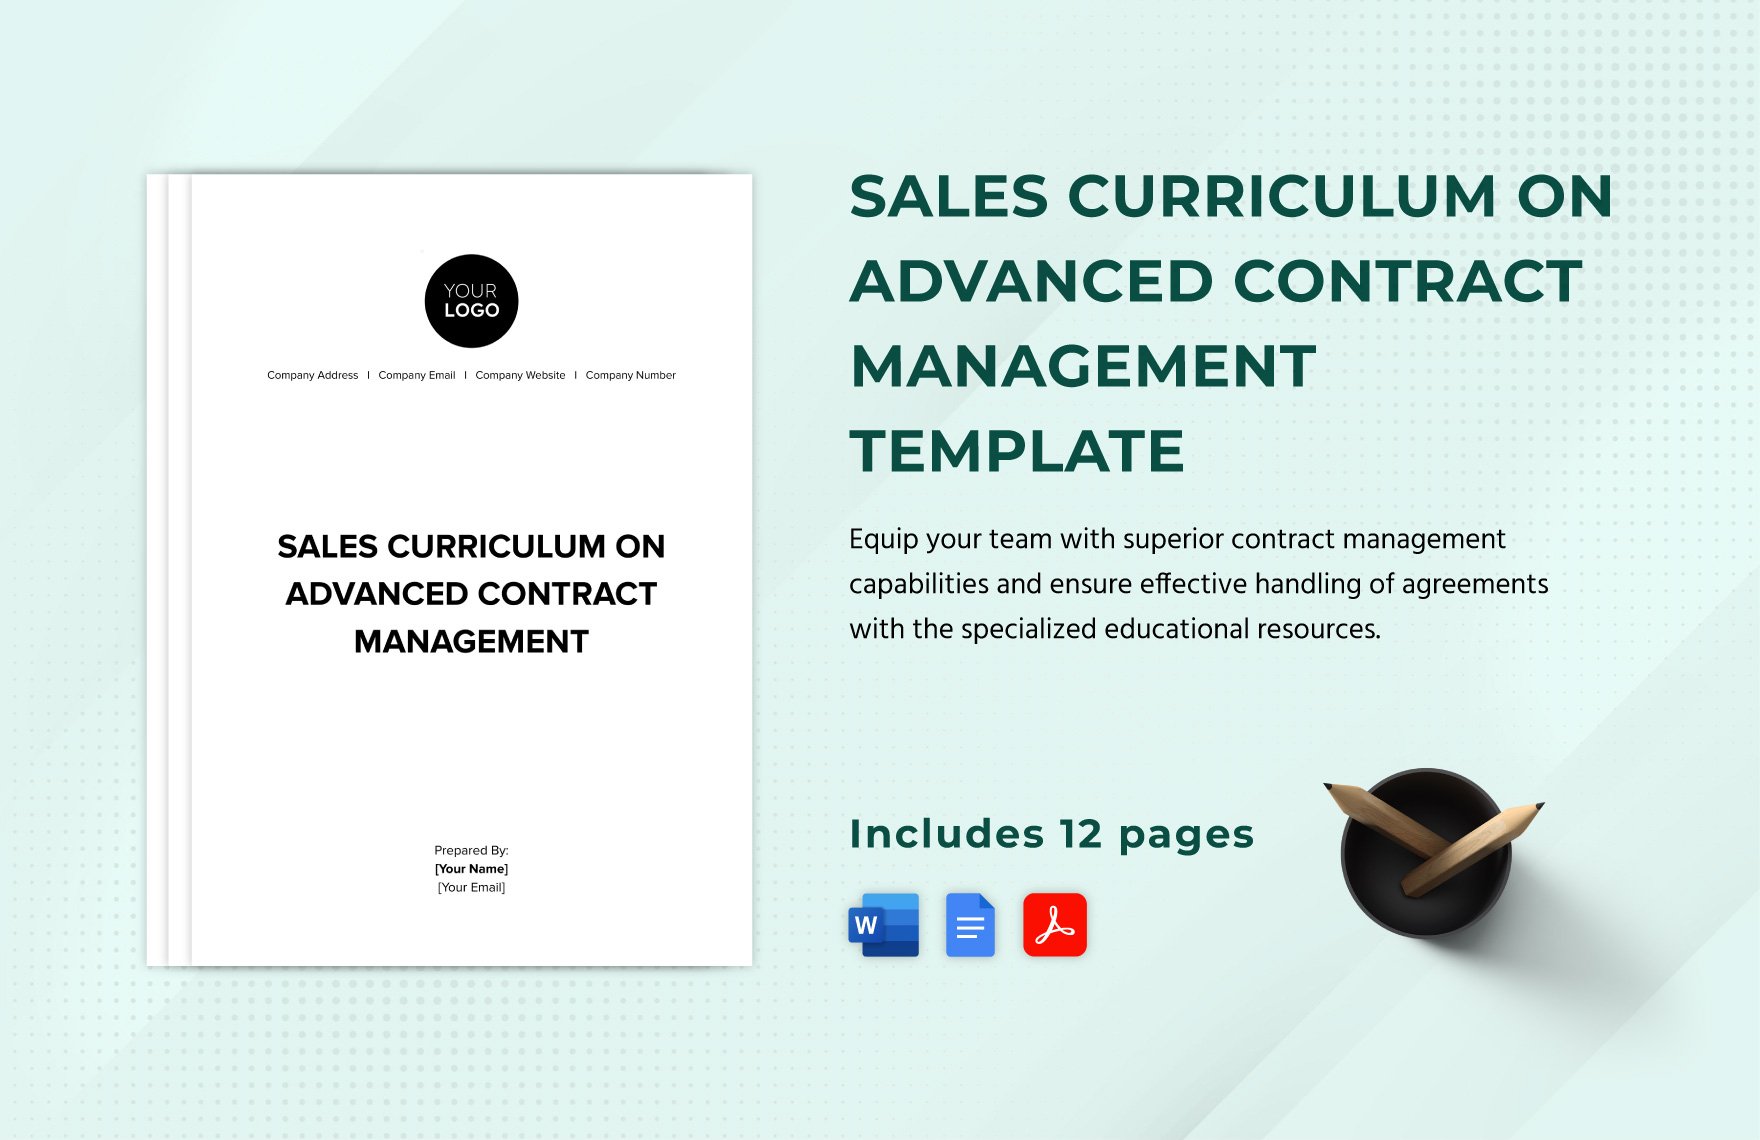 Sales Curriculum on Advanced Contract Management Template in Word, Google Docs, PDF